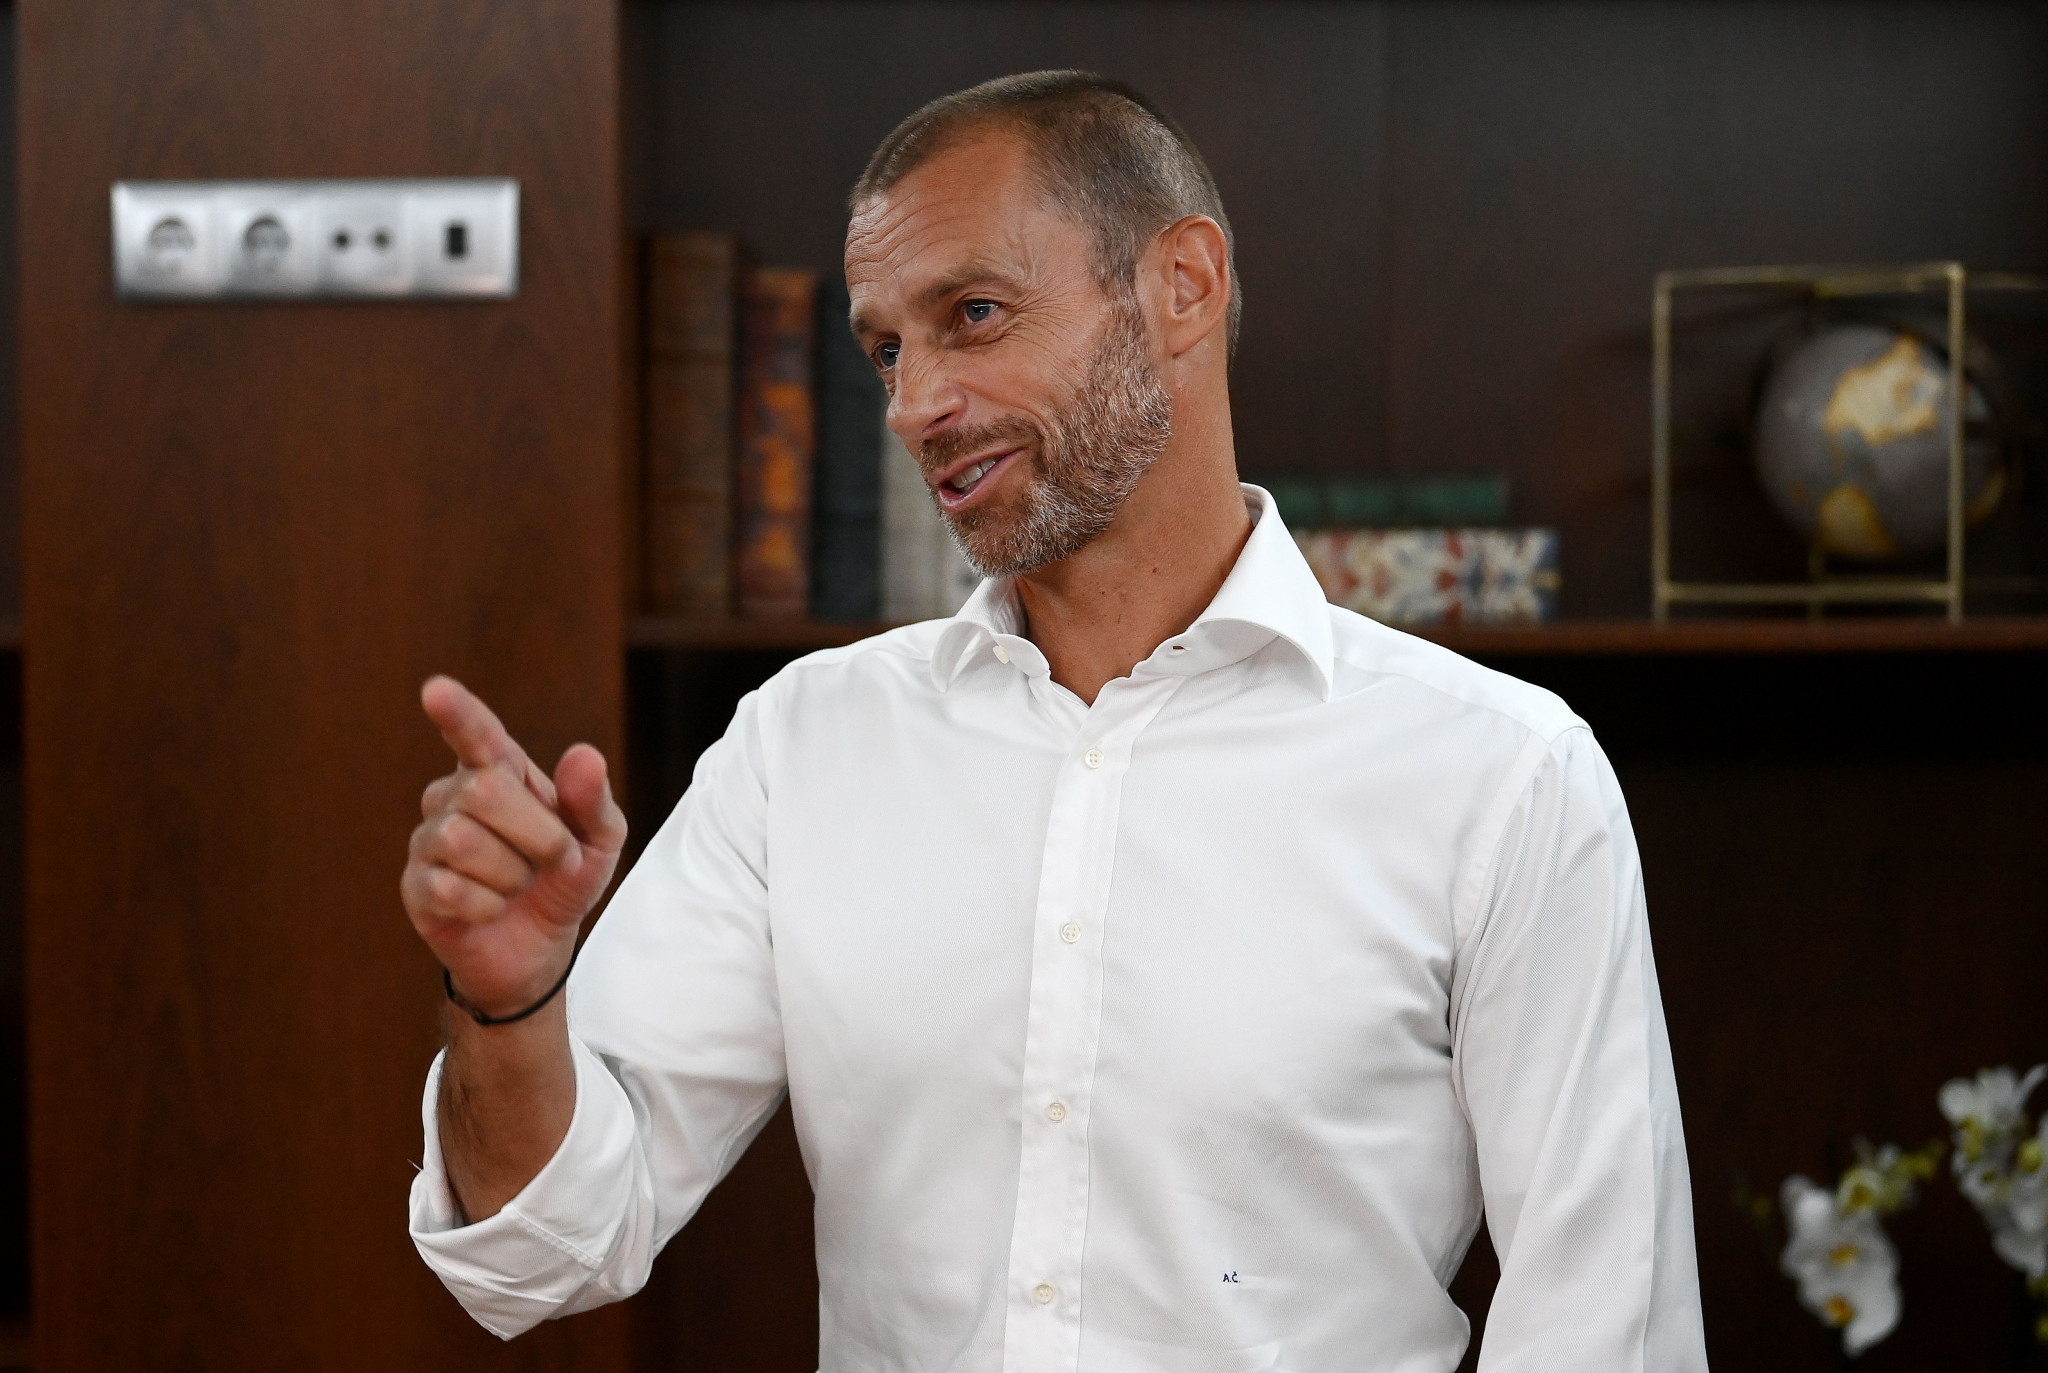 UEFA President Aleksander Čeferin has staunchly opposed FIFA's plans, stating they dilute the value of the World Cup ©Getty Images